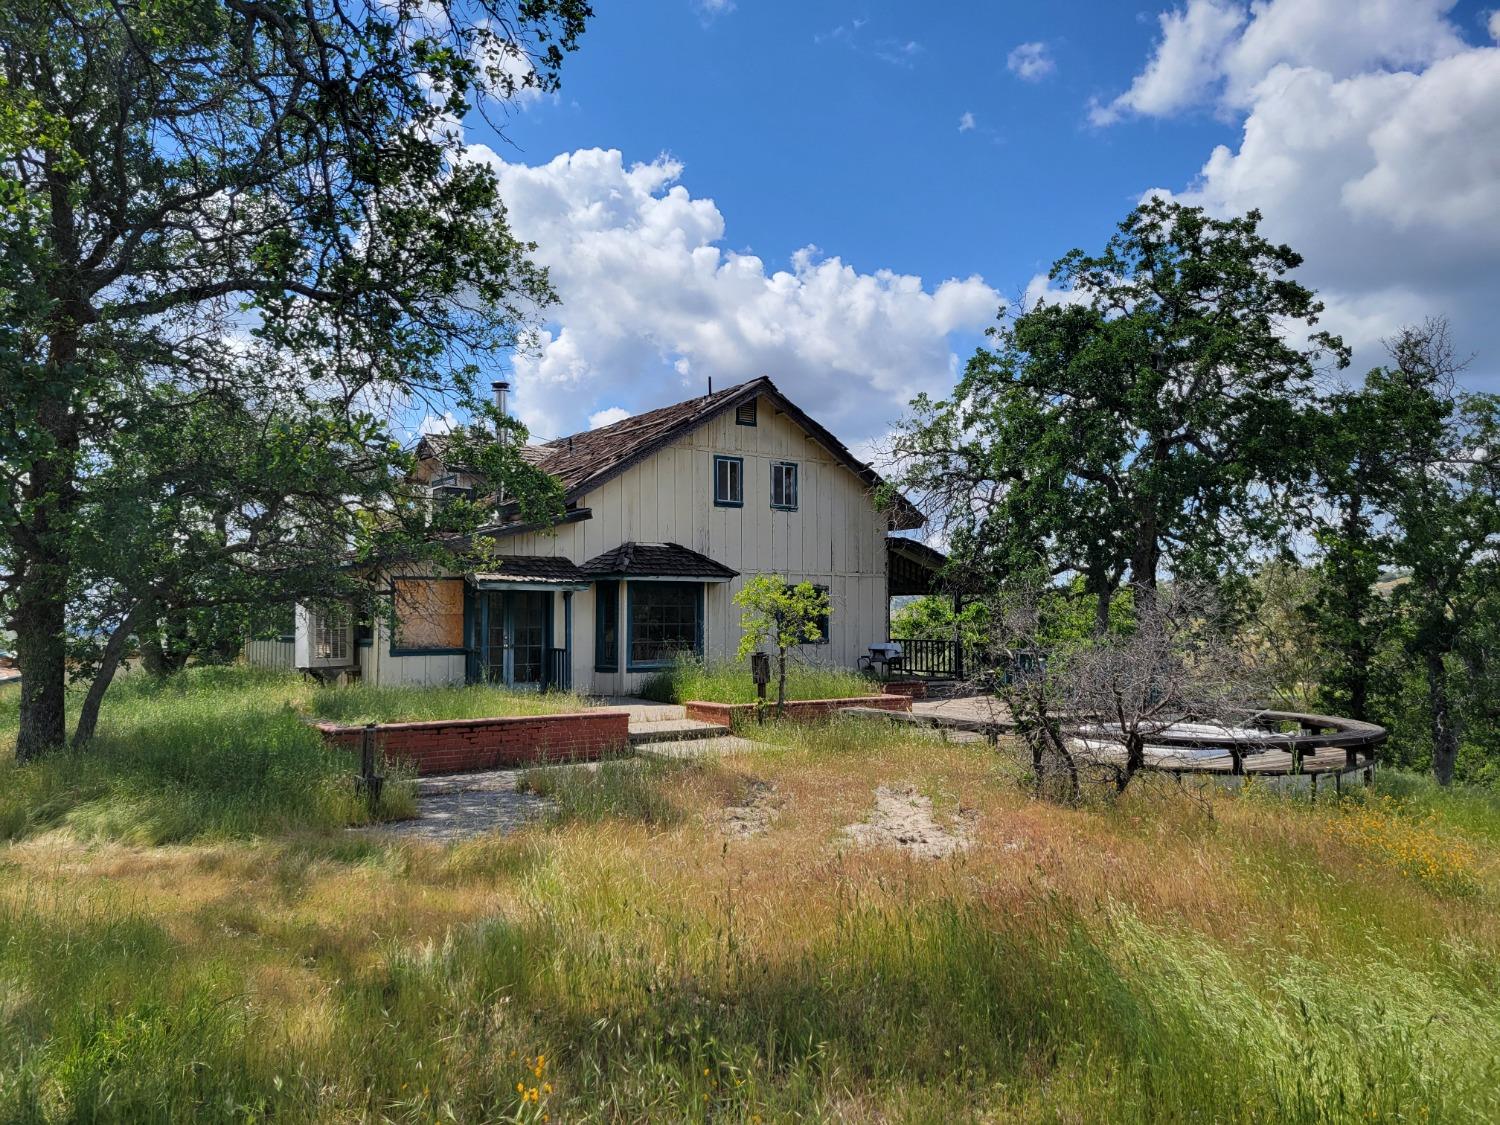 Photo of 22021 Red Tail Rd Rd in Friant, CA